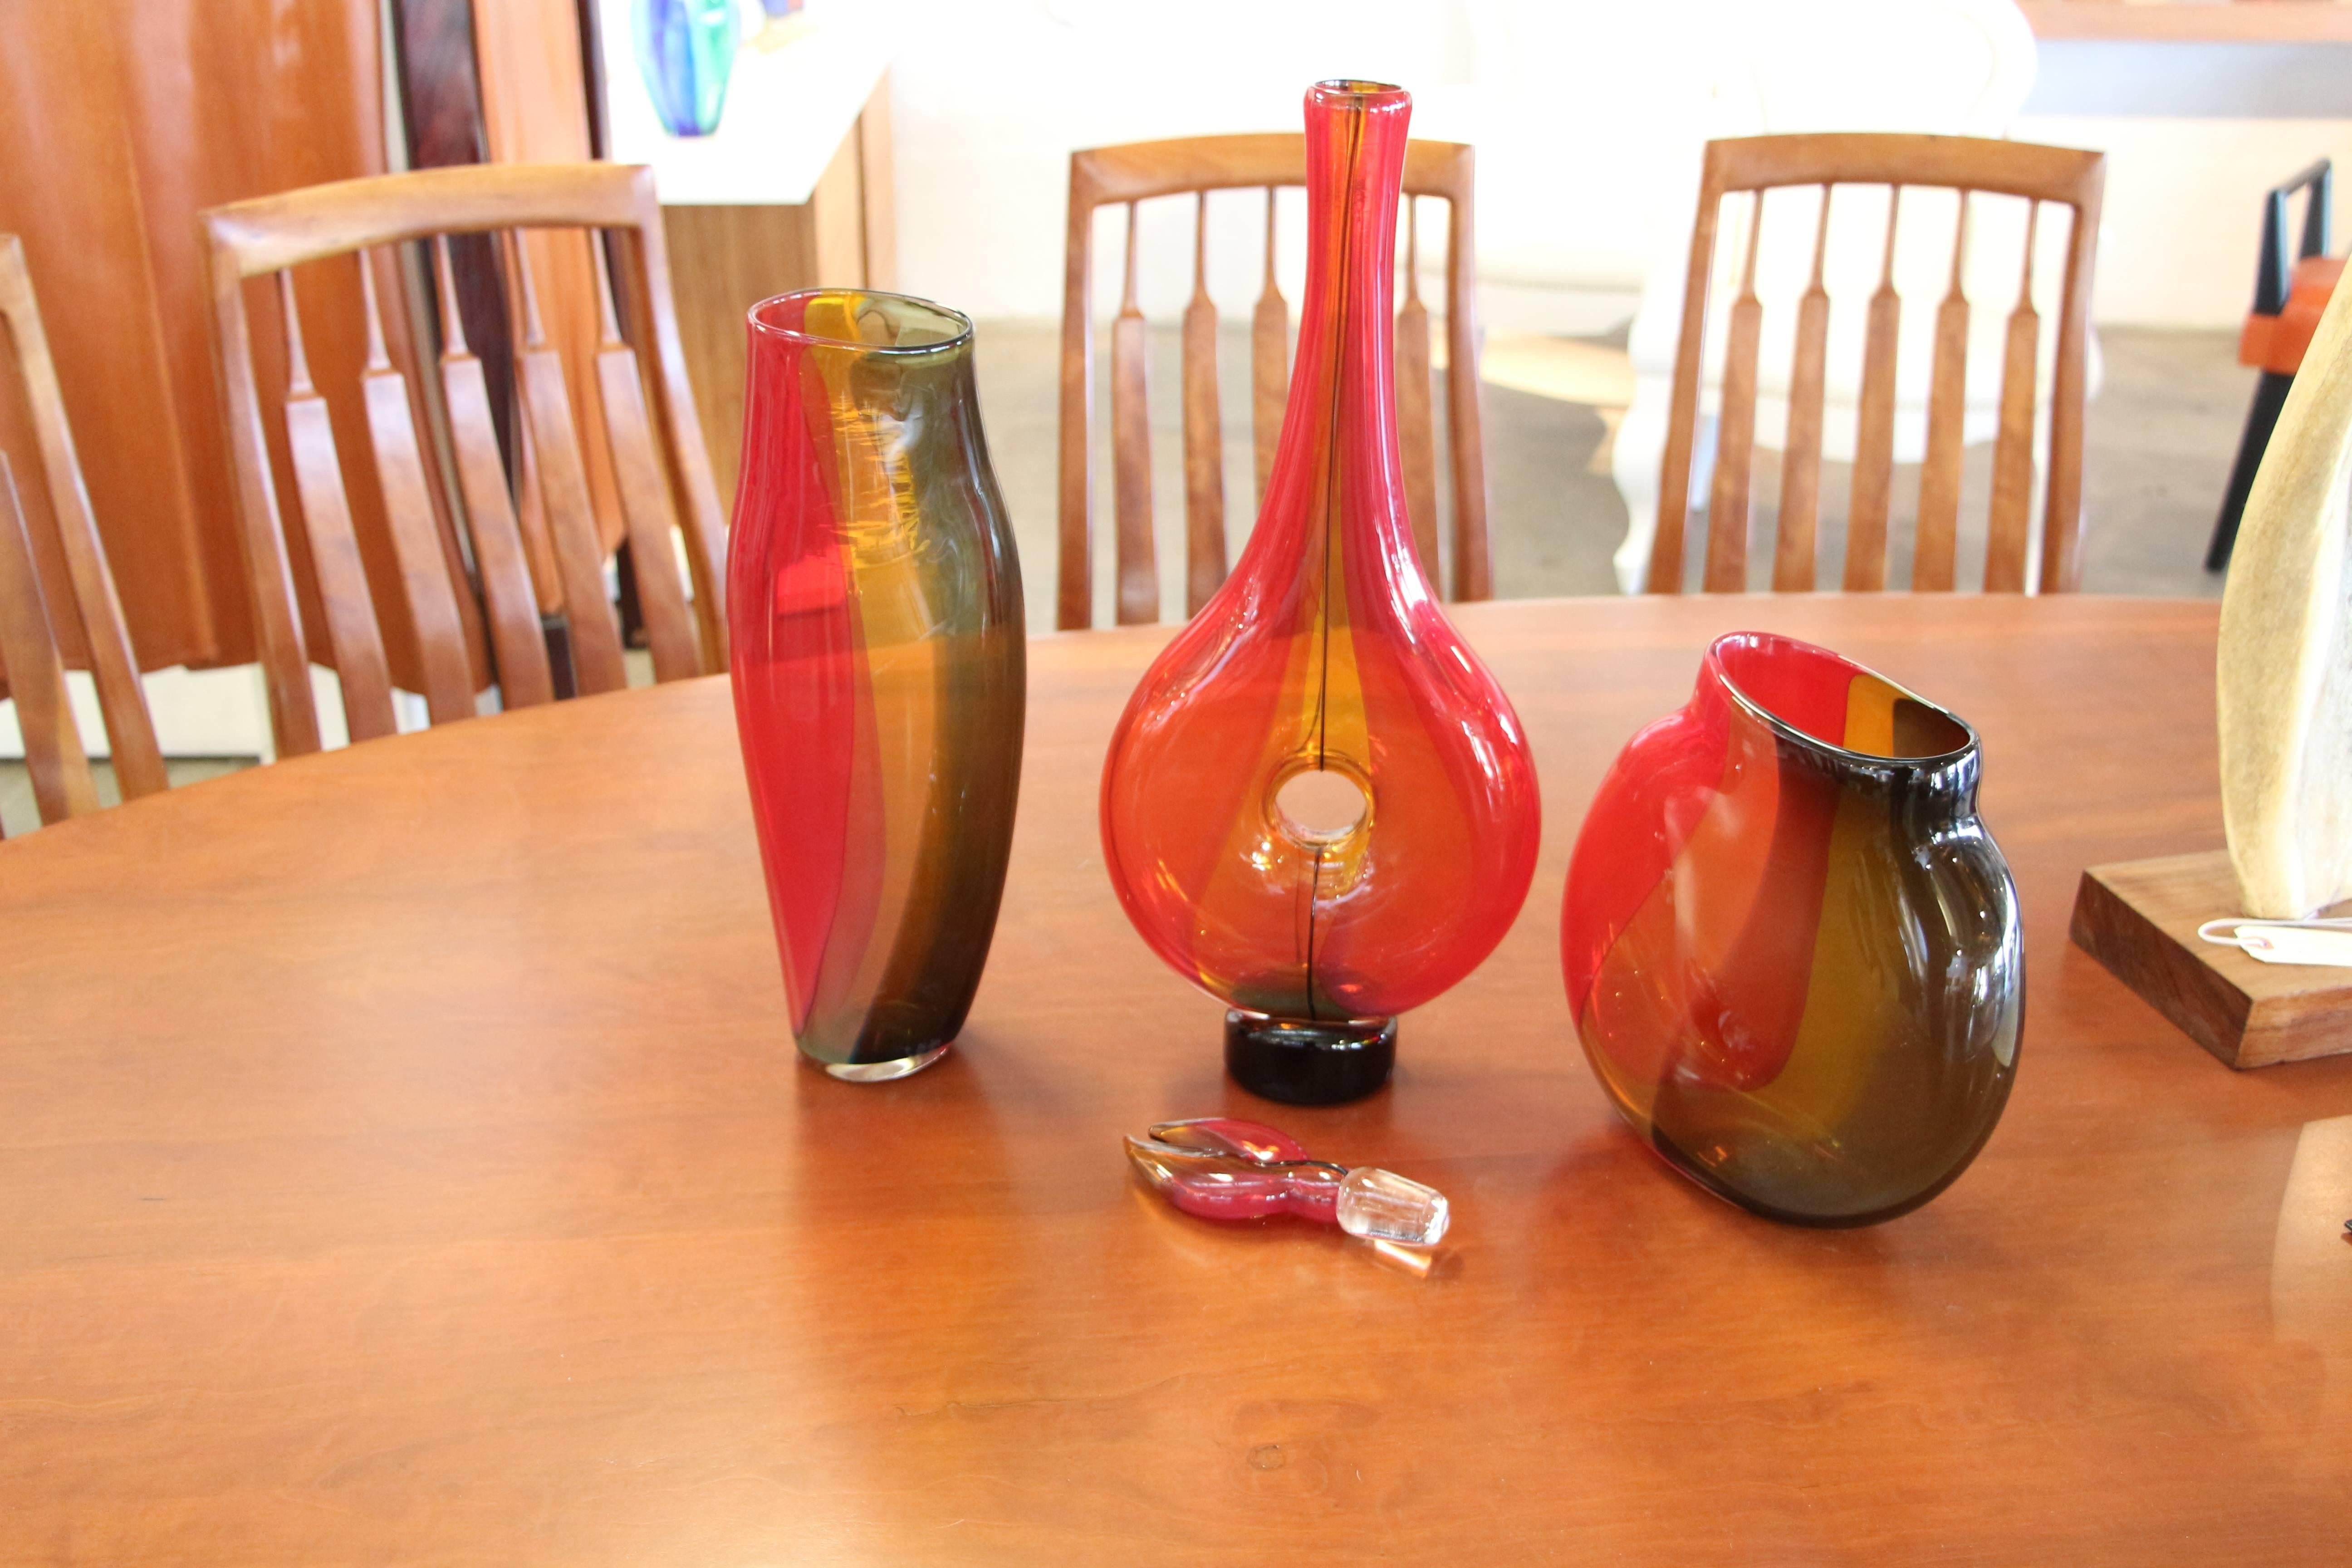 Beautiful signed pieces of glass. I cannot make out the signature, which is the same on all three. They are all dated 2005. The decanter has almost a lobster claw shaped handle. Very nice color and all are in great condition. The tallest decanter in